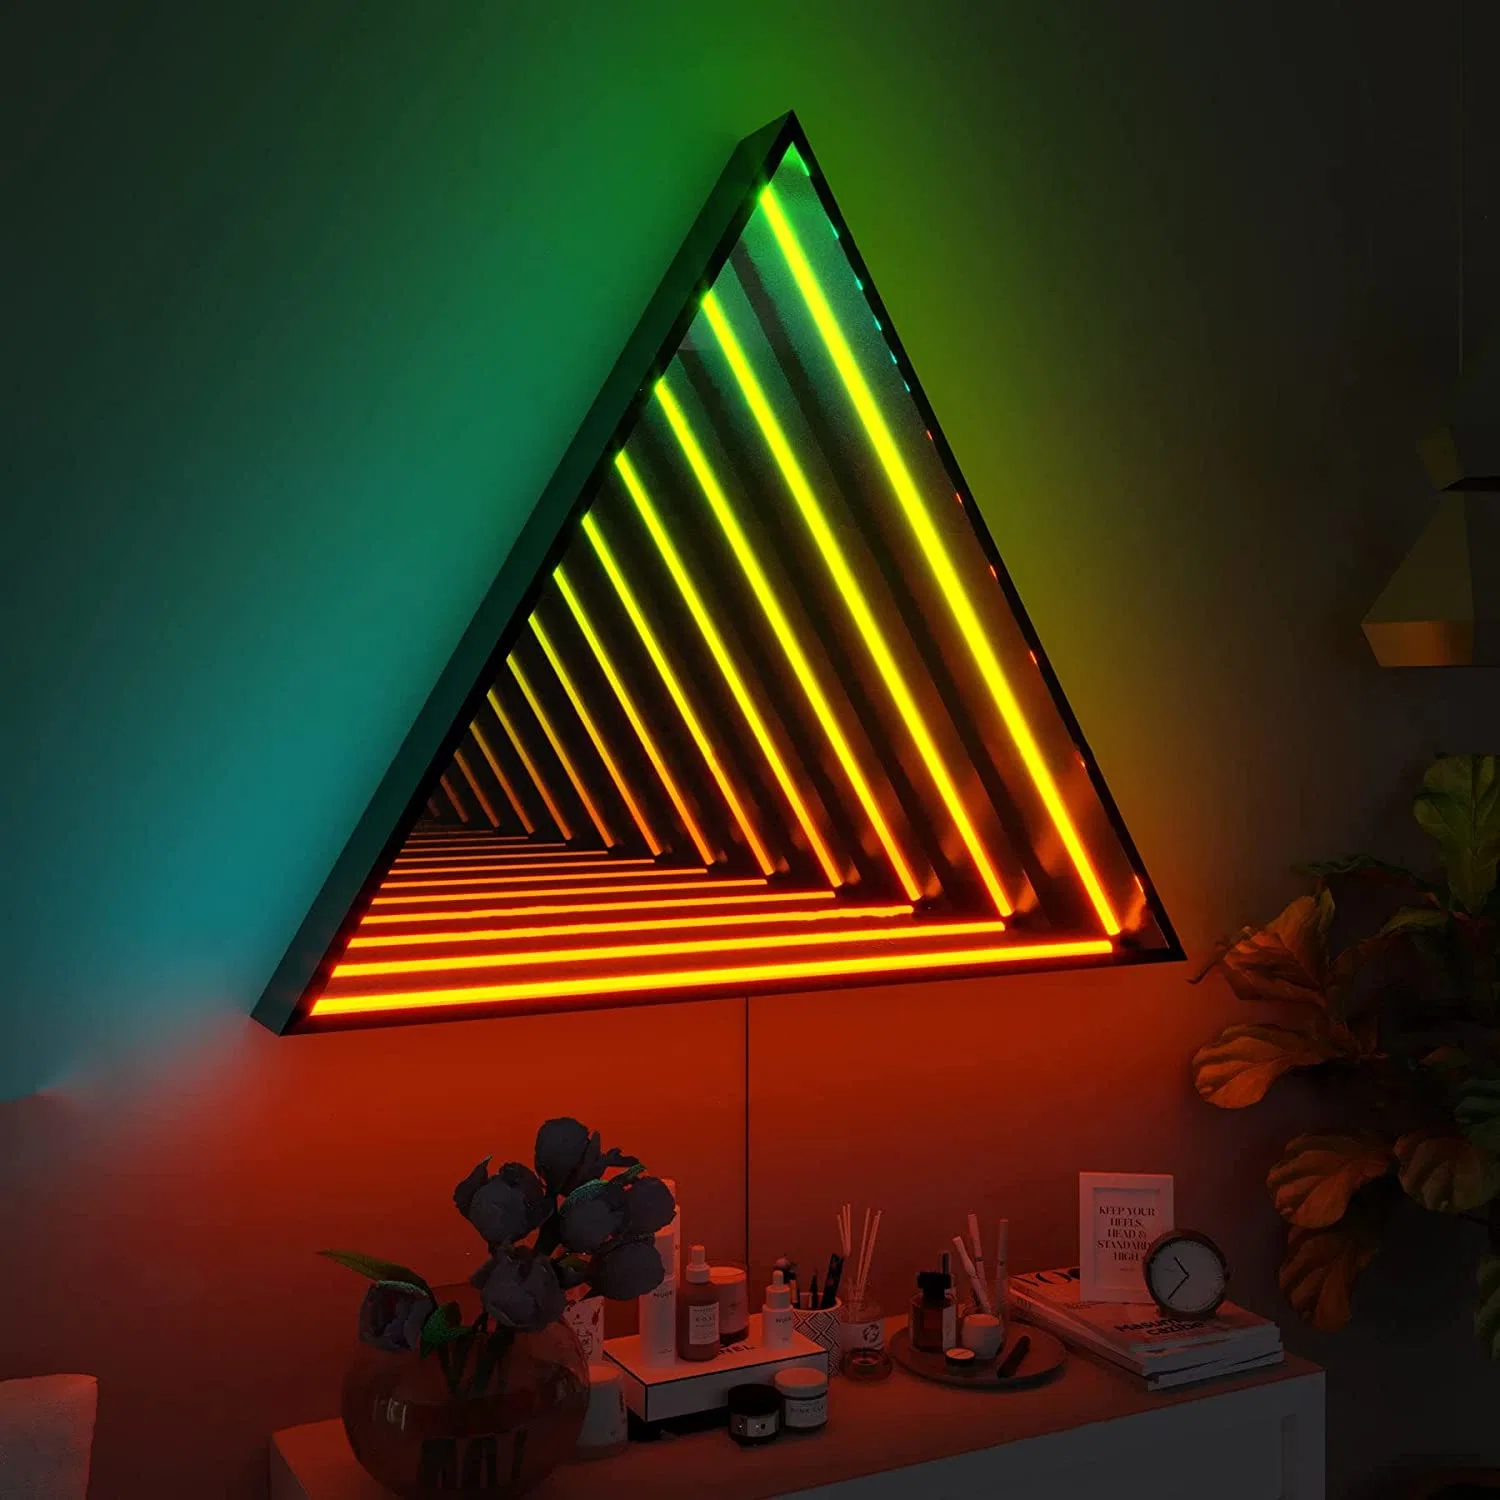 Infinity Triangle Mirror - LED Infinity Mirror Wall Lamp, Geometric RGB Colour Changing Wall Decor, 3D Tunnel Magical Lighting, Holographic Portal